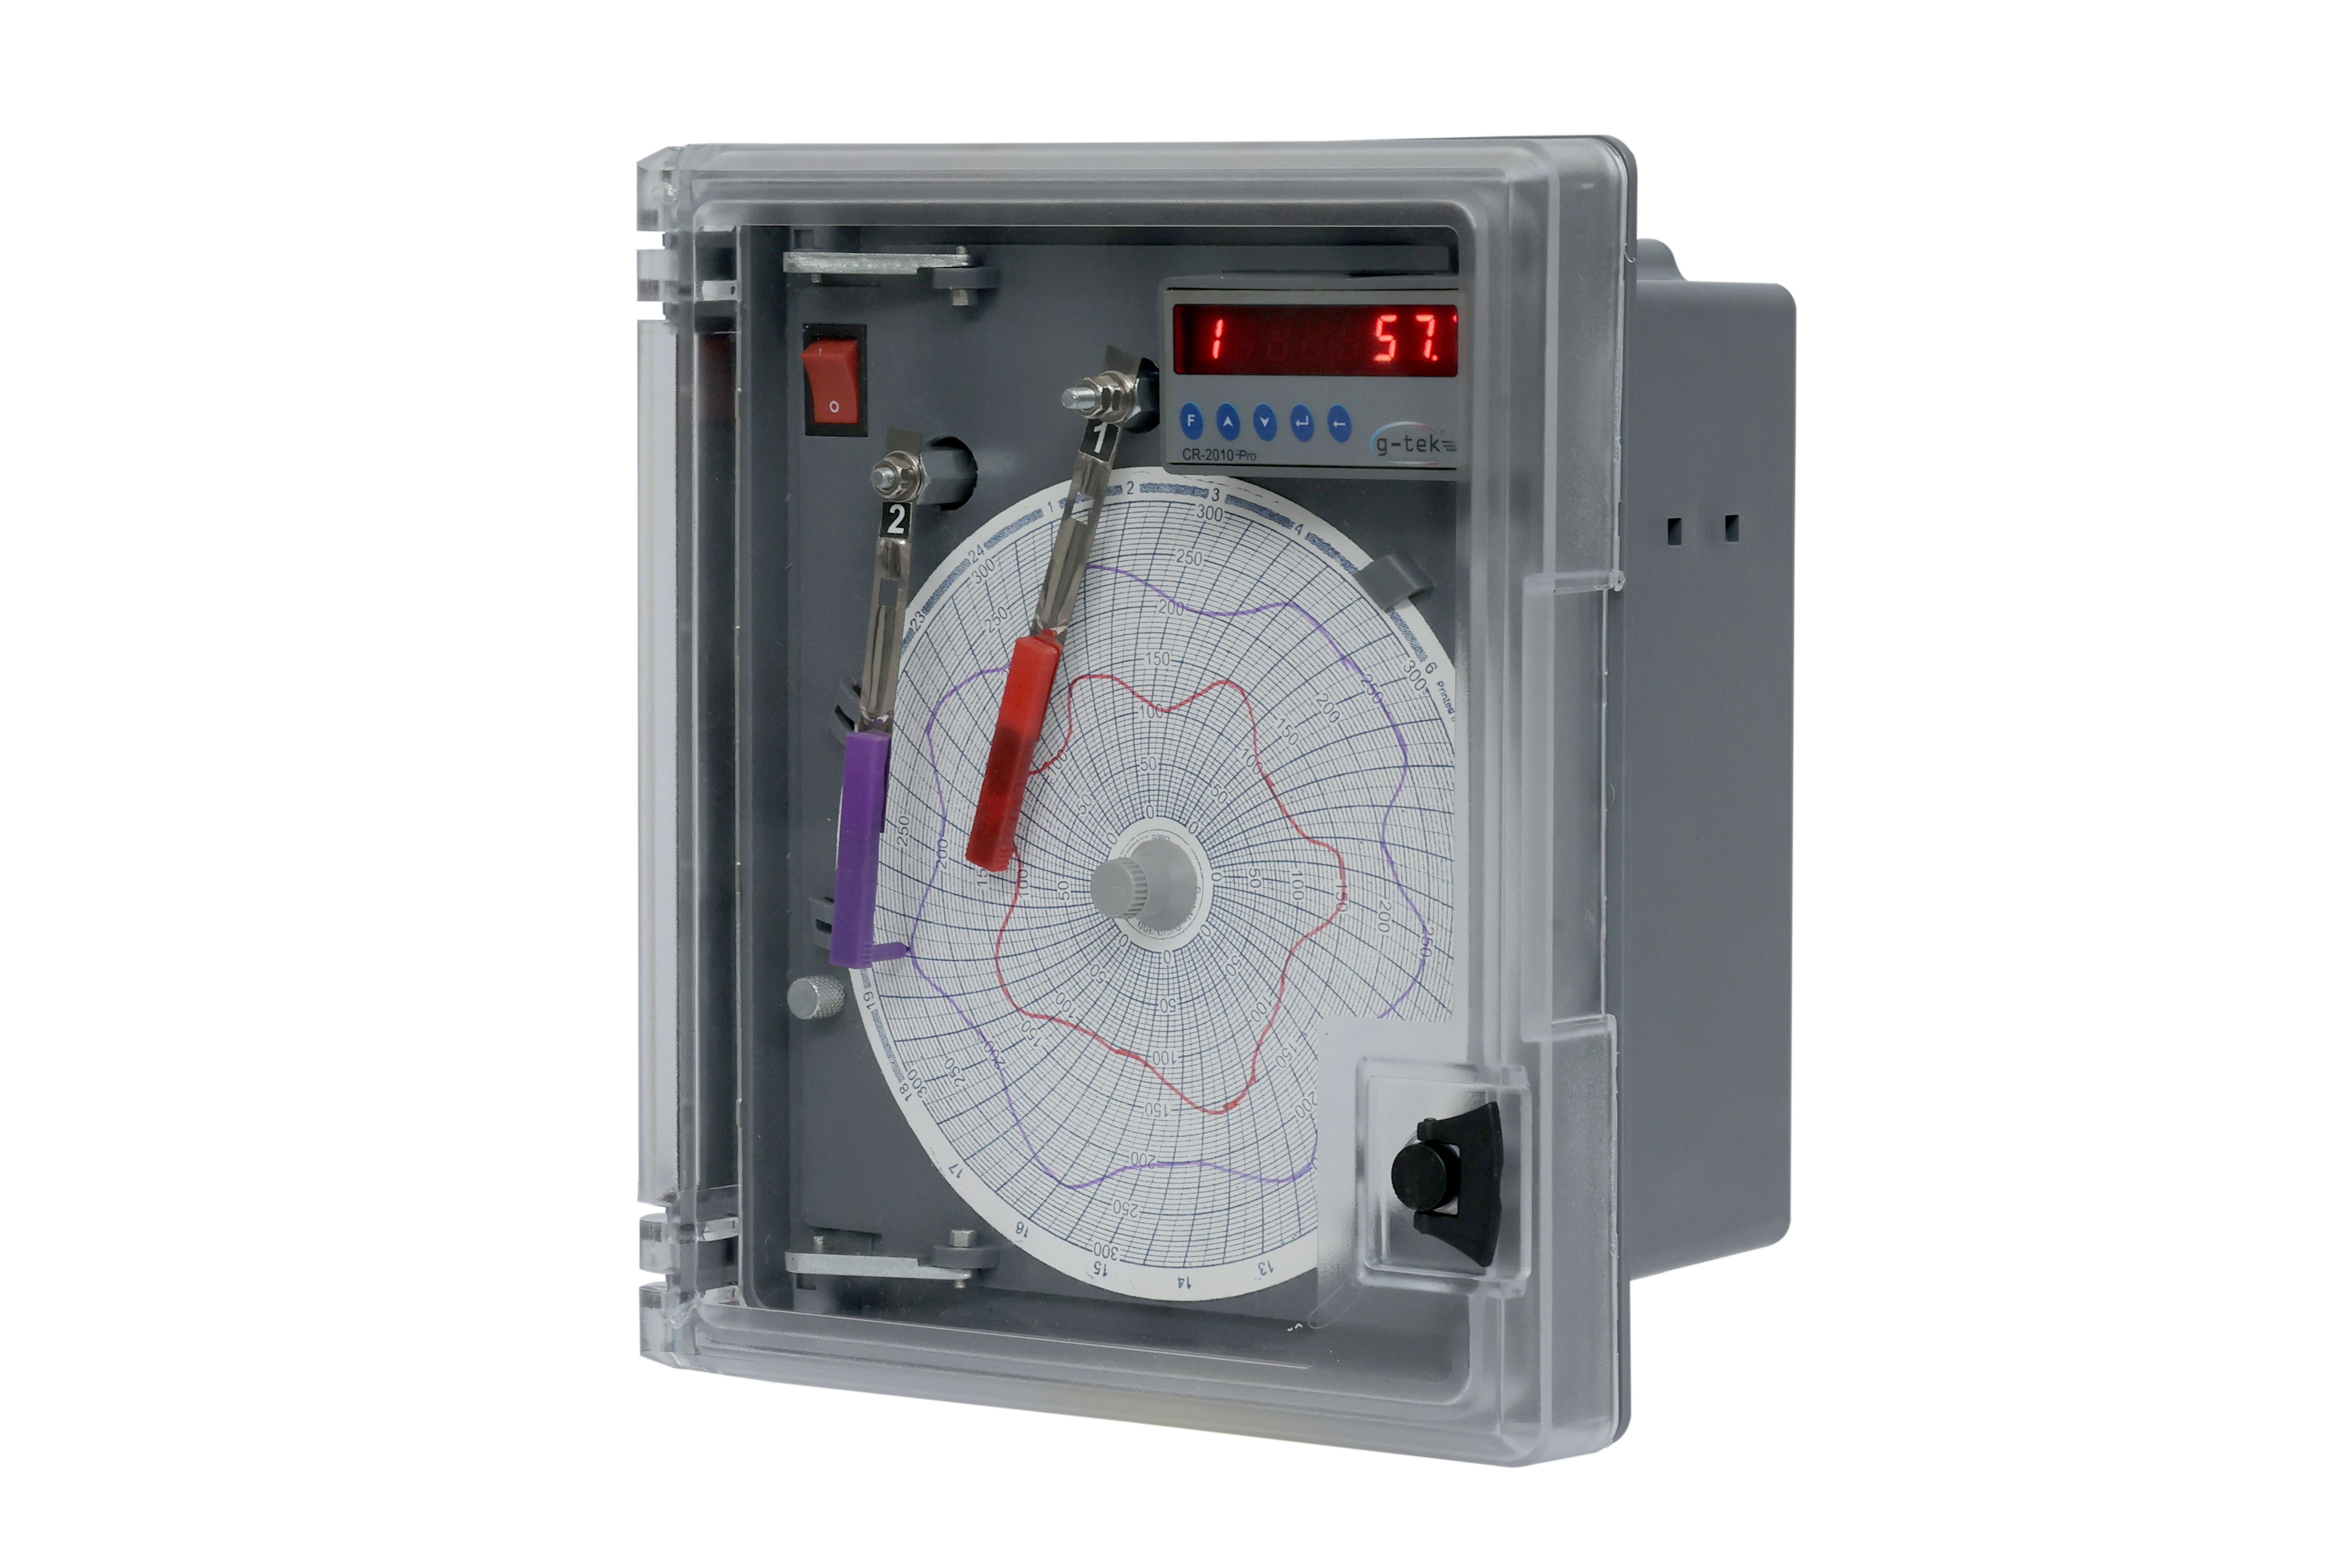 6 Inch 2 Pen Circular Chart Recorder With Display